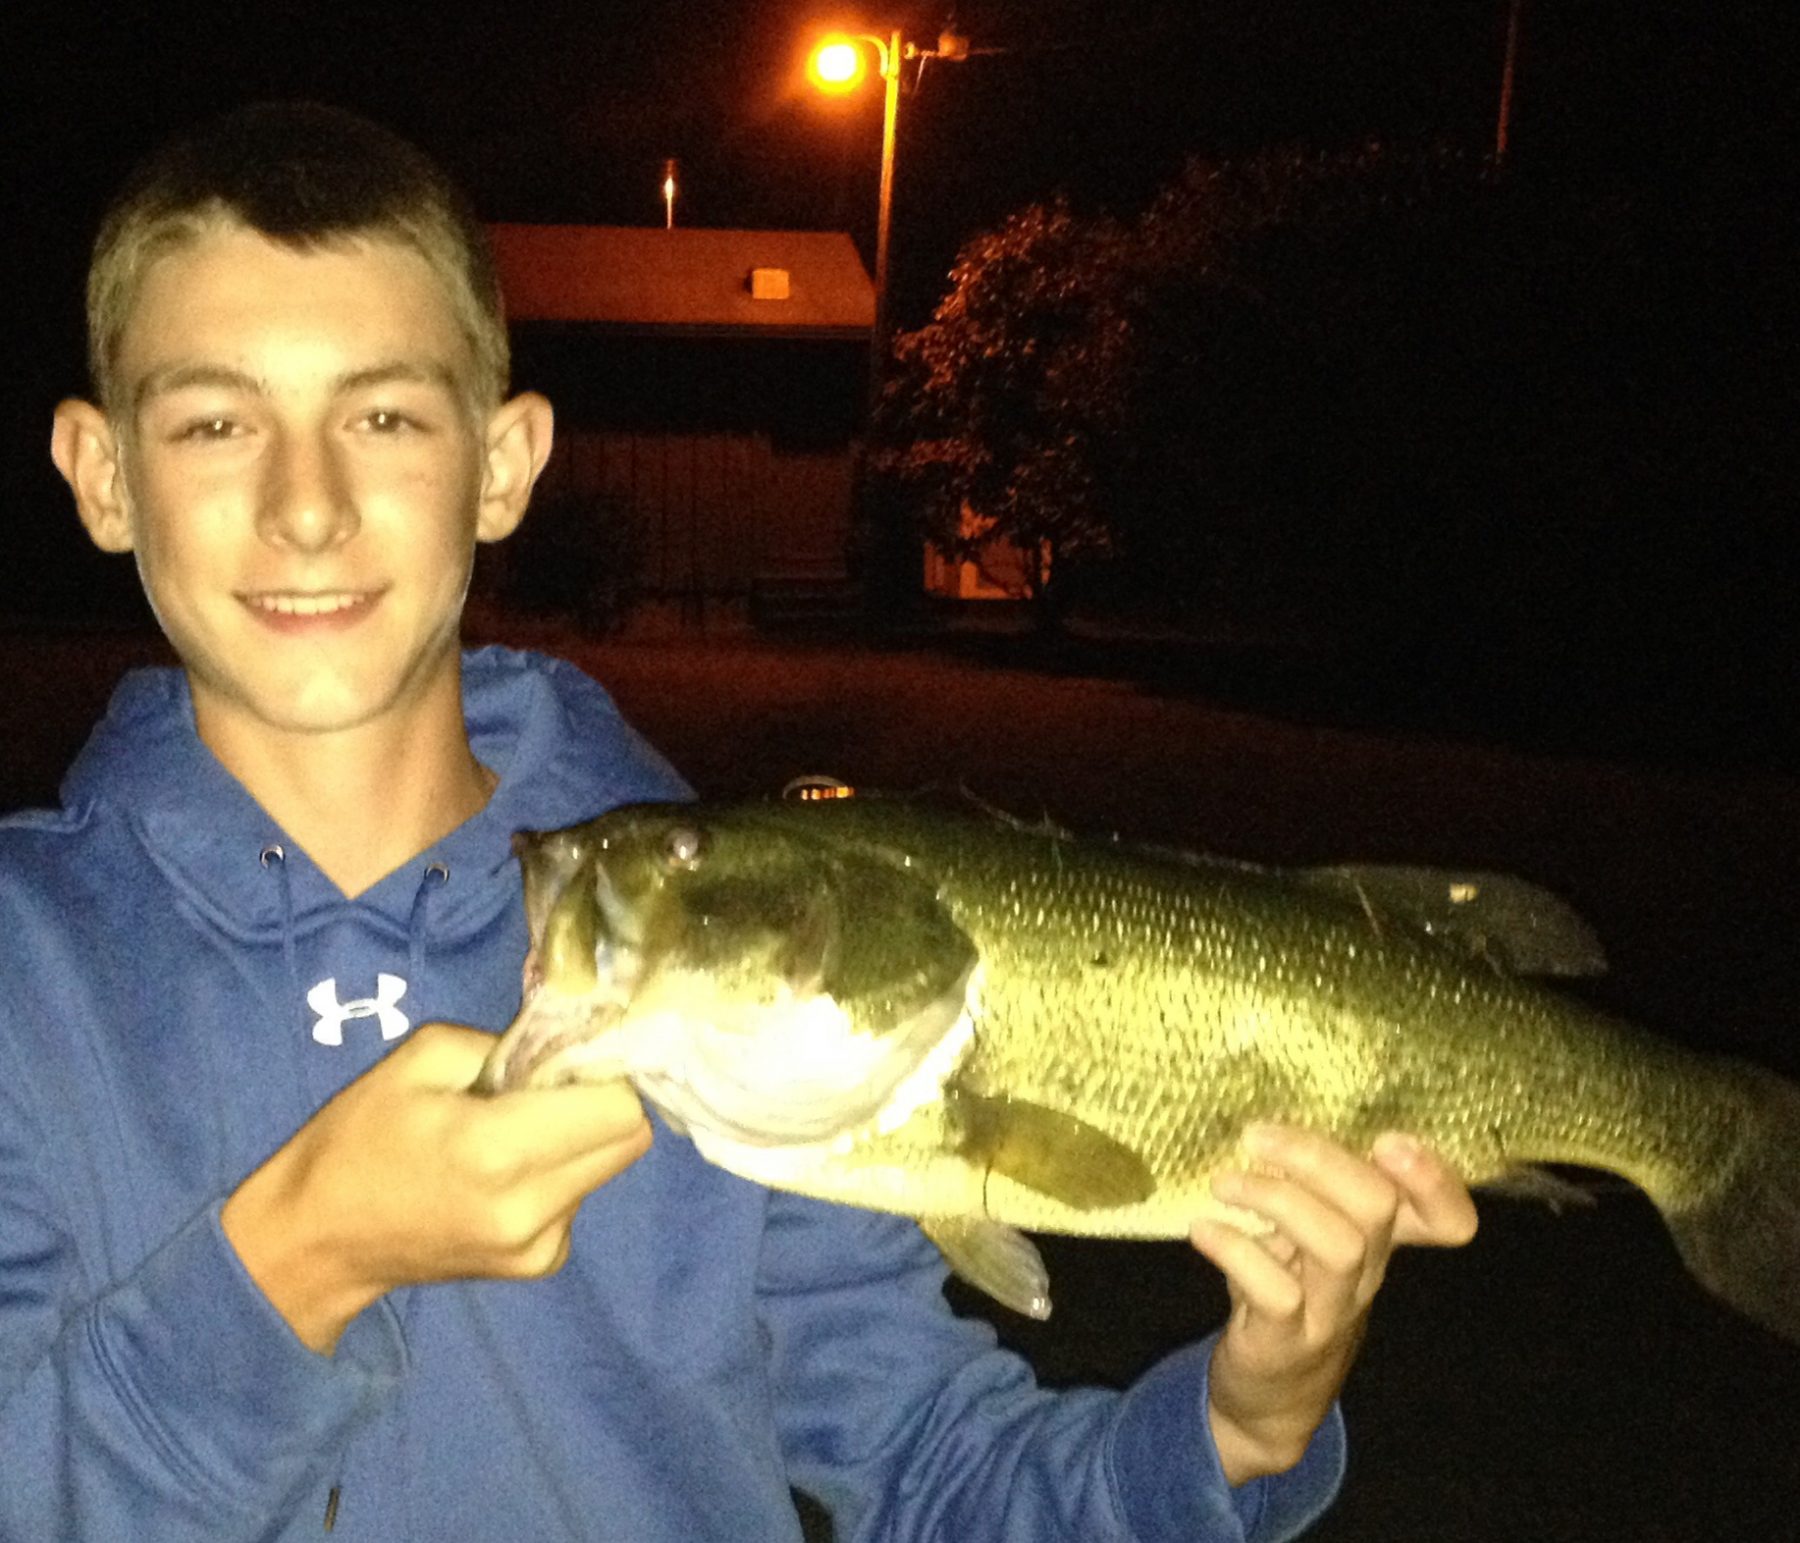 Check out this Bass caught in our fishing pond